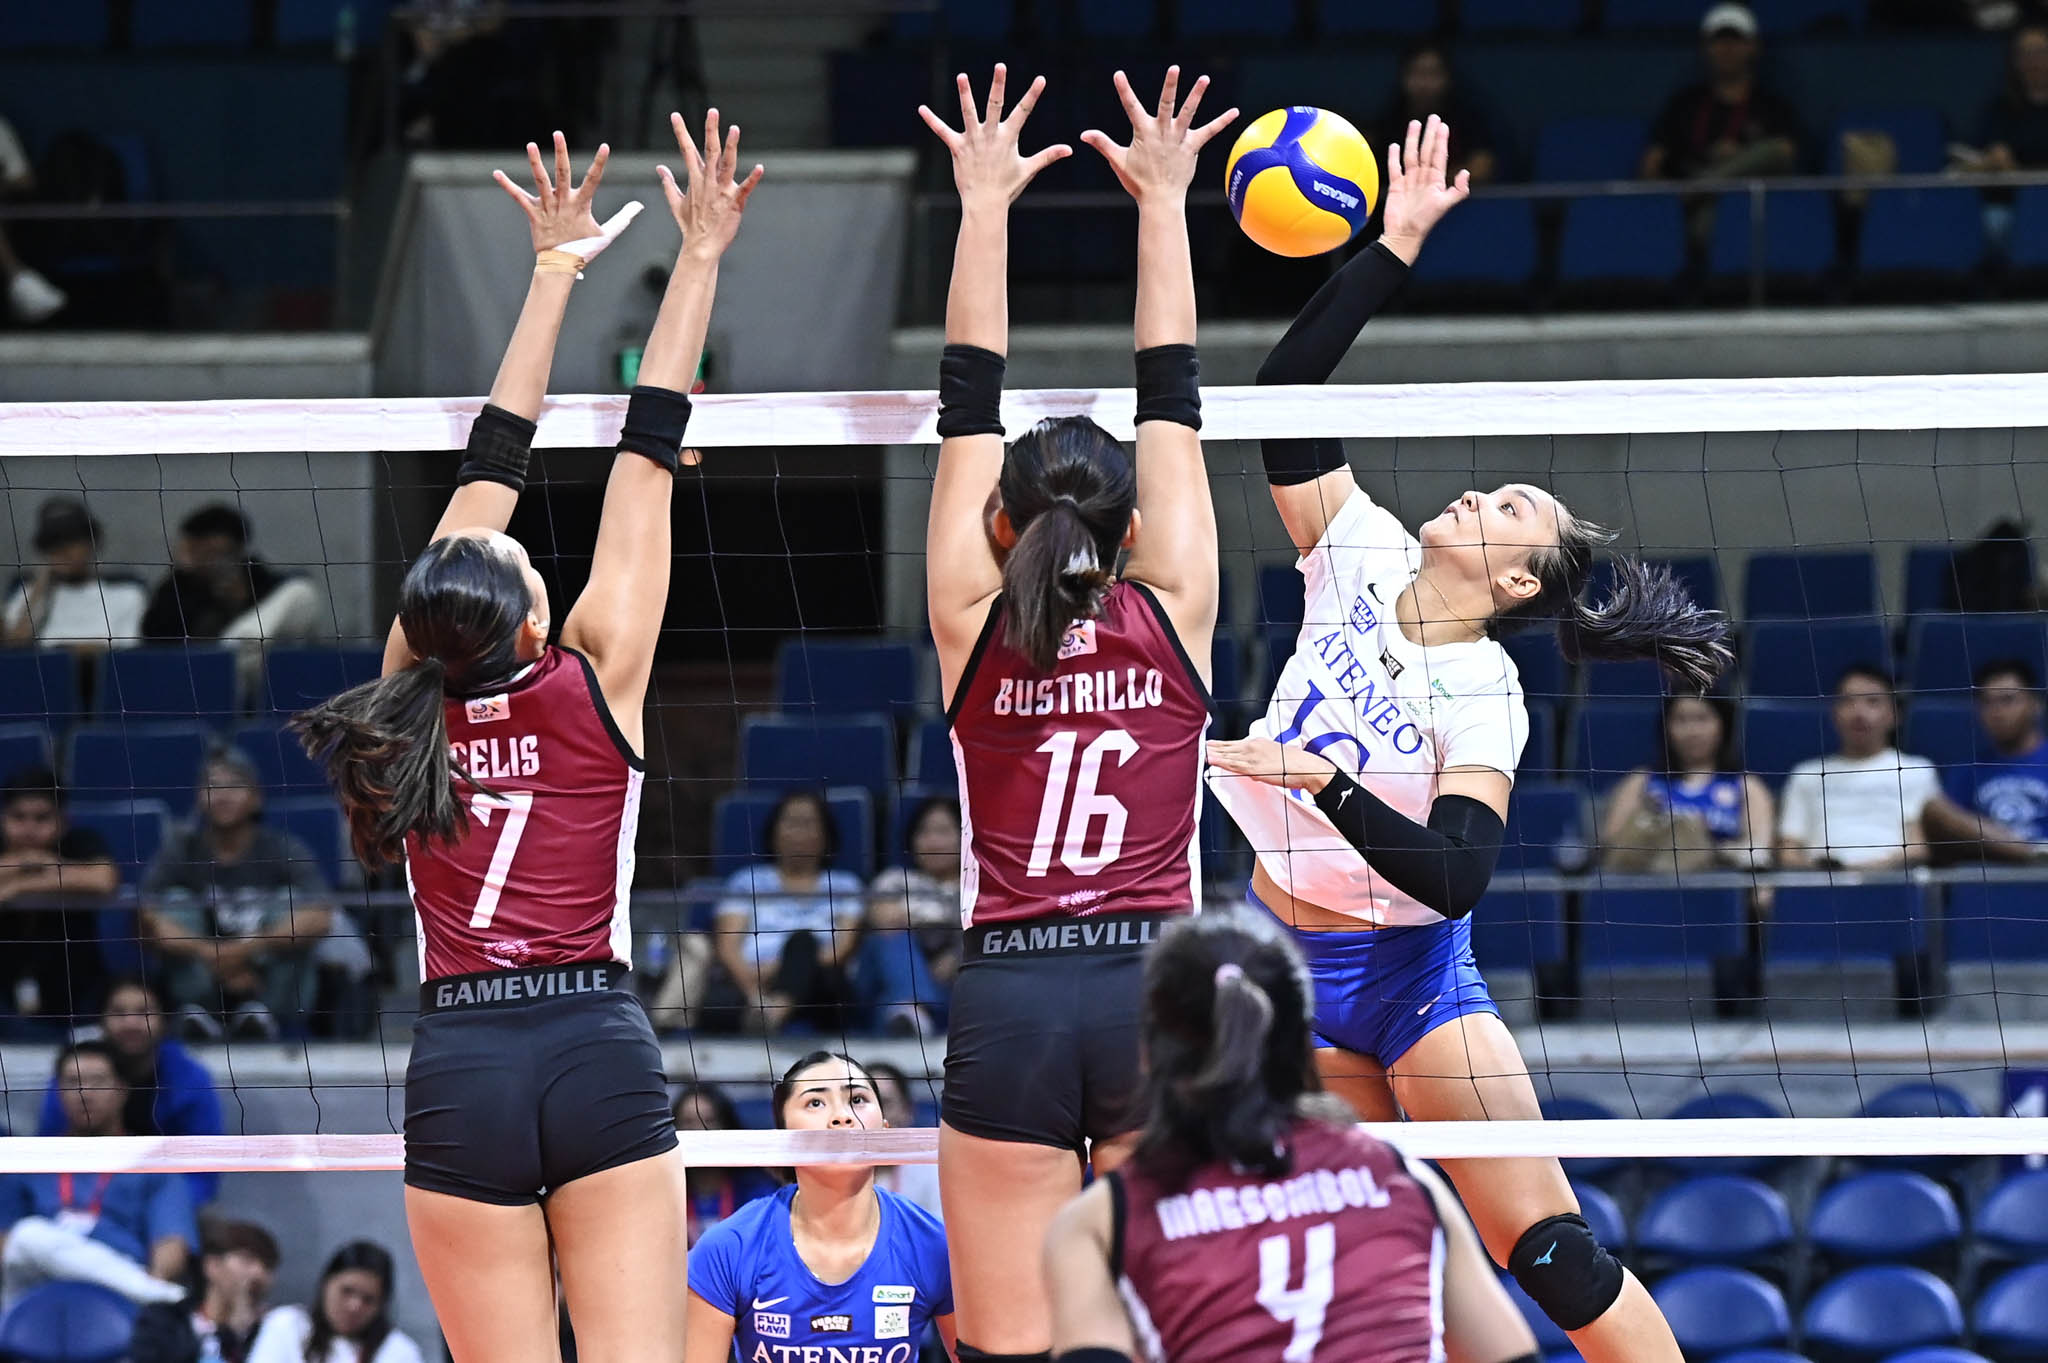 Ateneo ends losing skid, takes down UP for first win